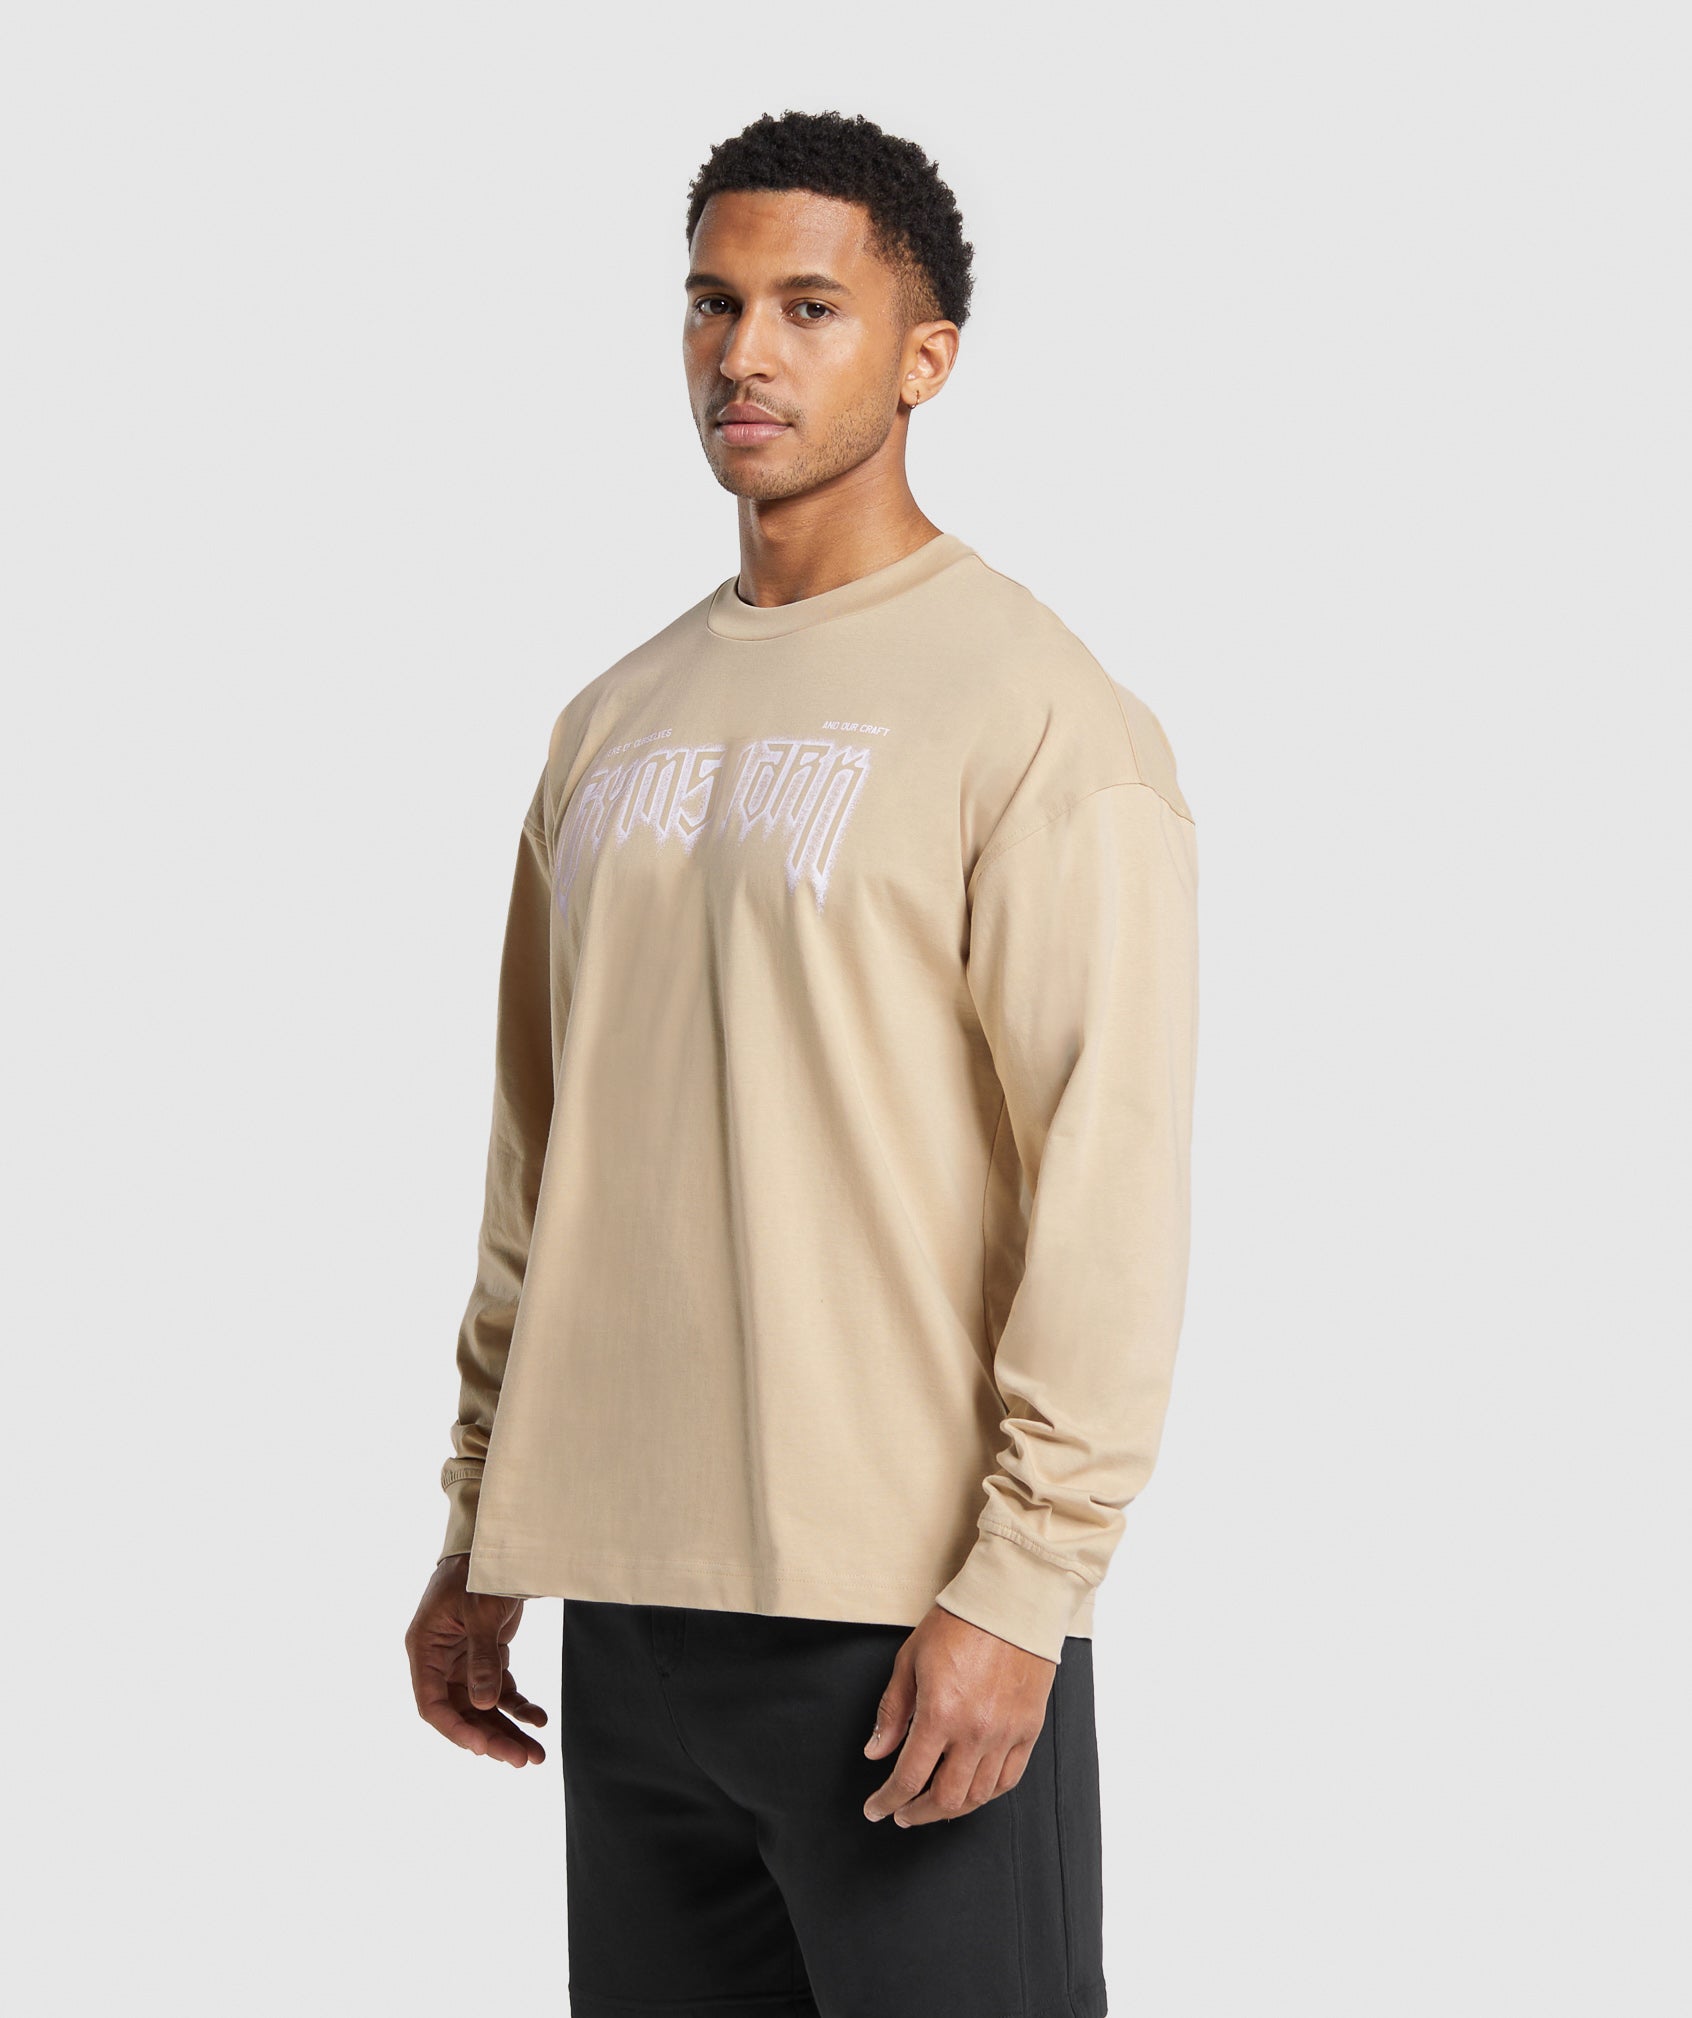 Masters of Our Craft Long Sleeve T-Shirt in Vanilla Beige - view 3